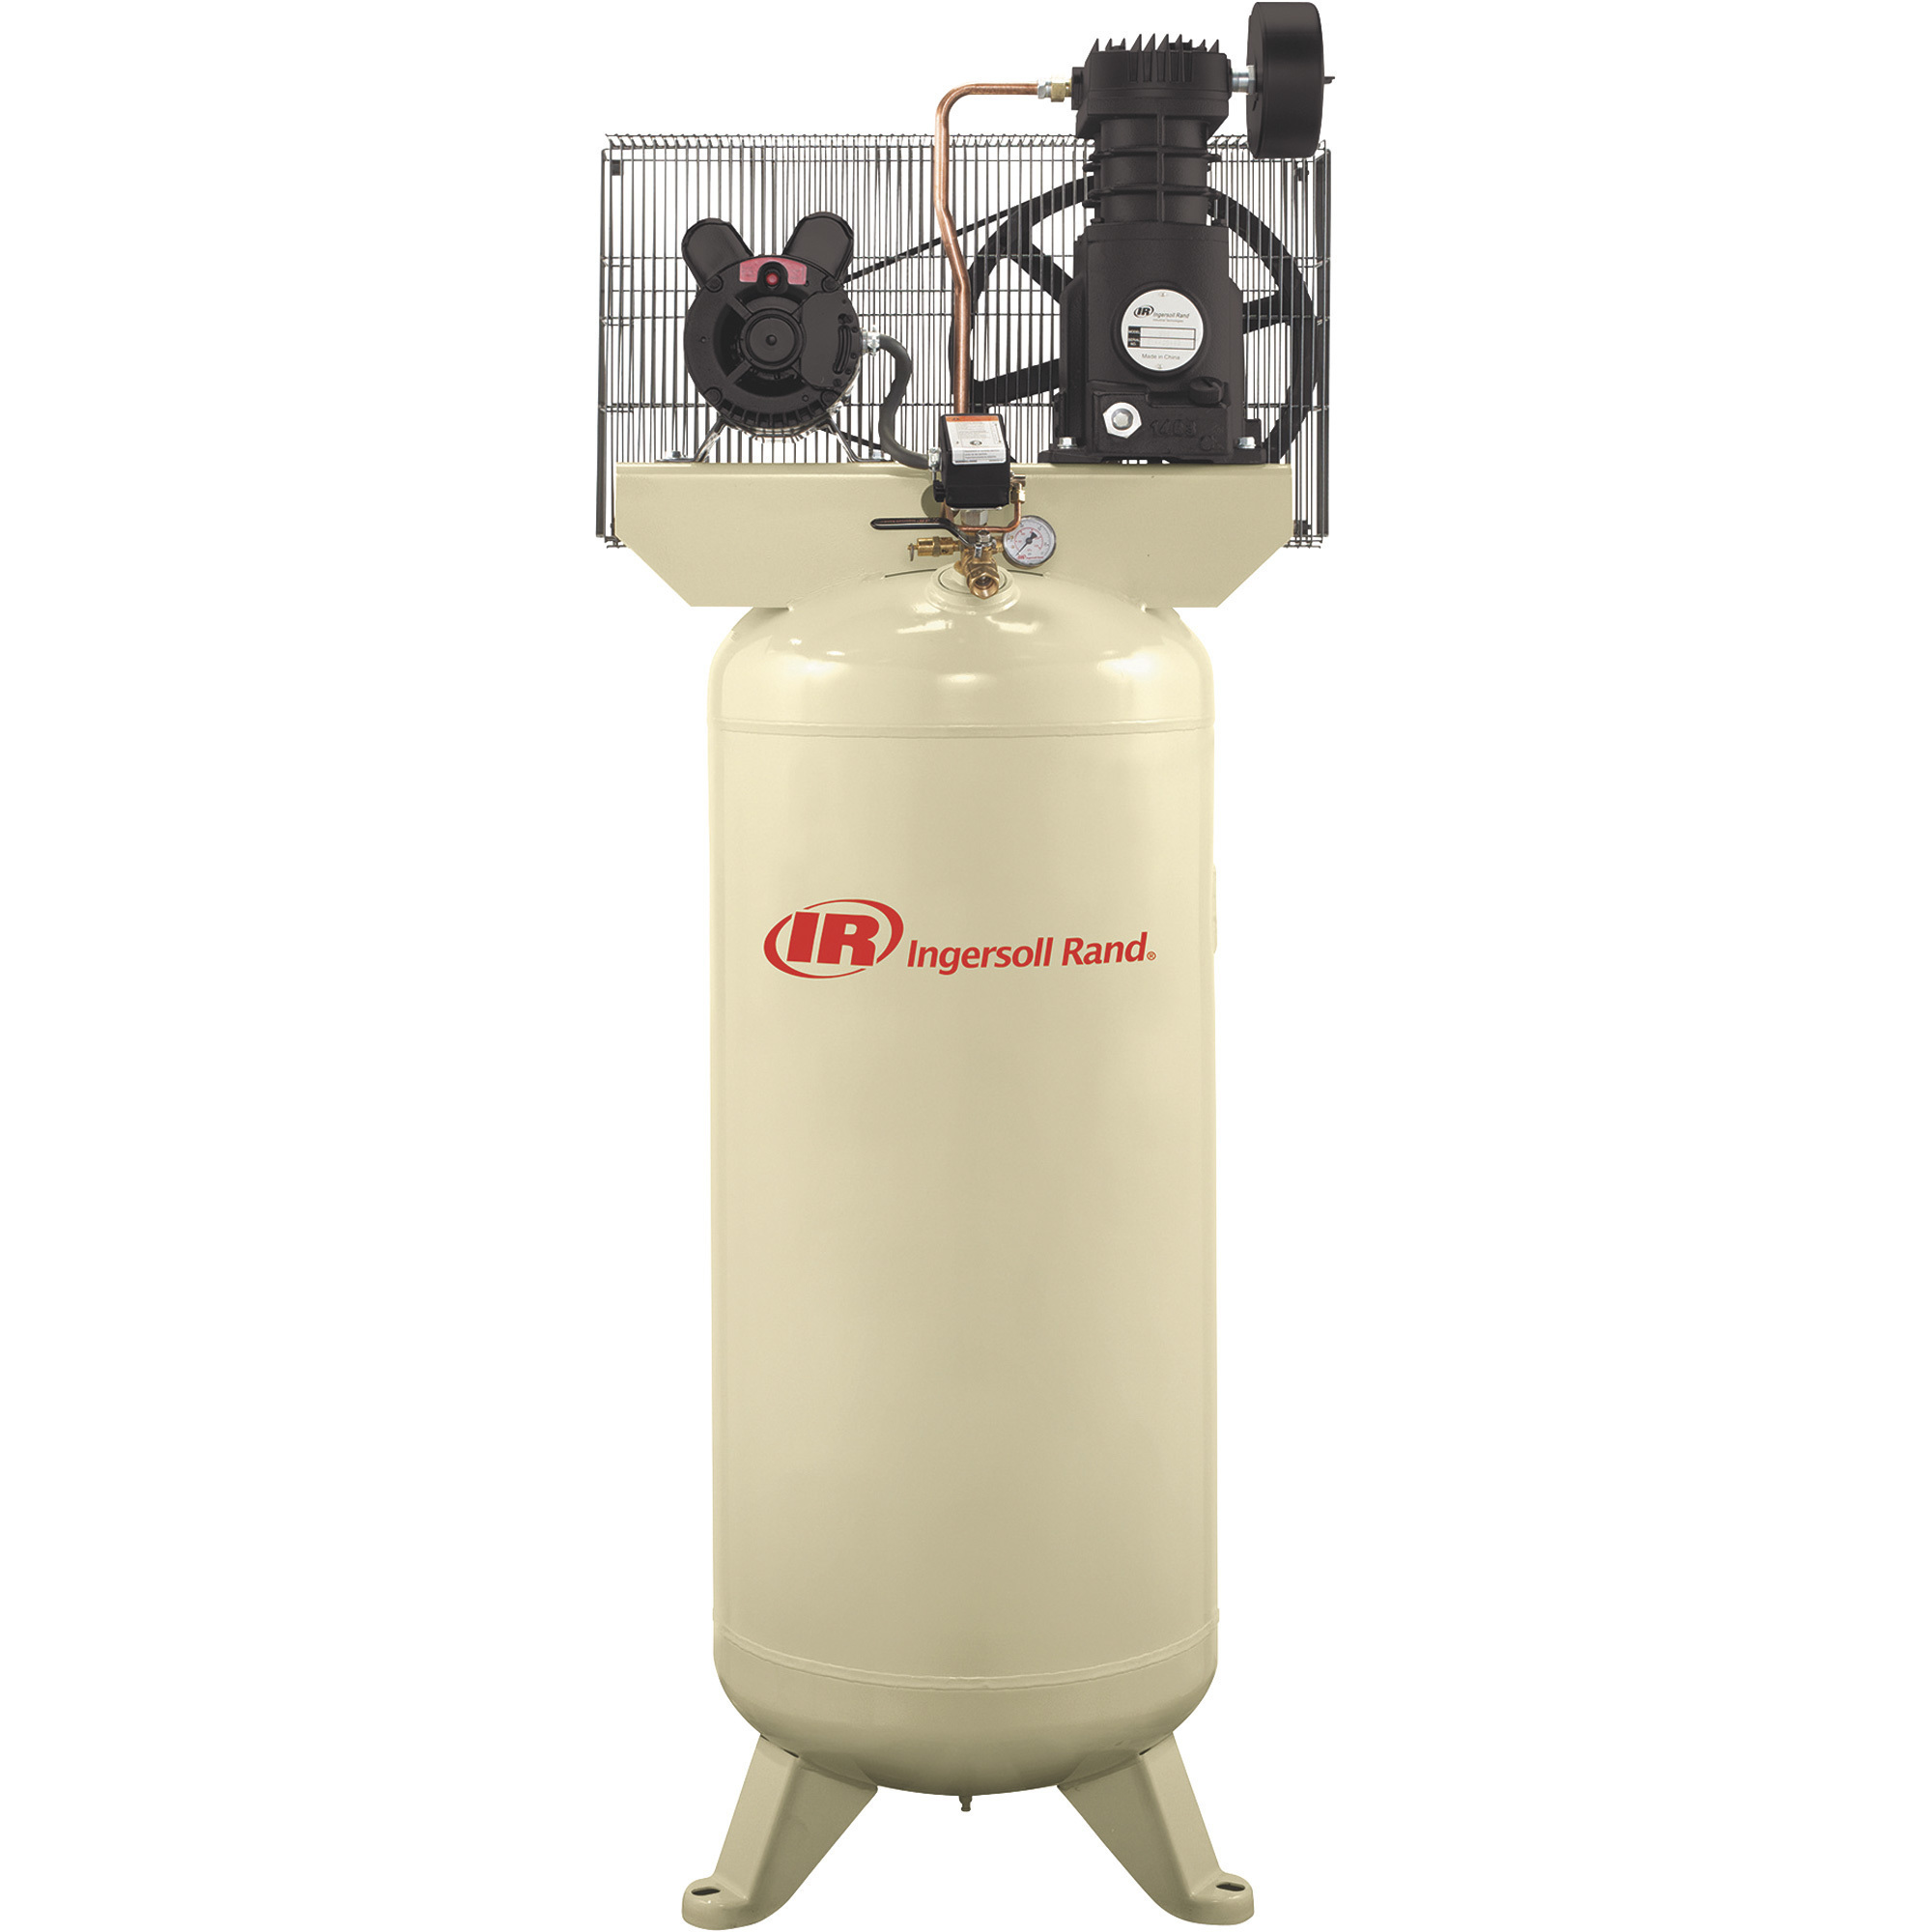 Ingersoll Rand Air Compressor - 5 HP, 230 Volt, 1-Phase, 60-Gallon Vertical, Electric Stationary, Model# SS5L5 -  20103172